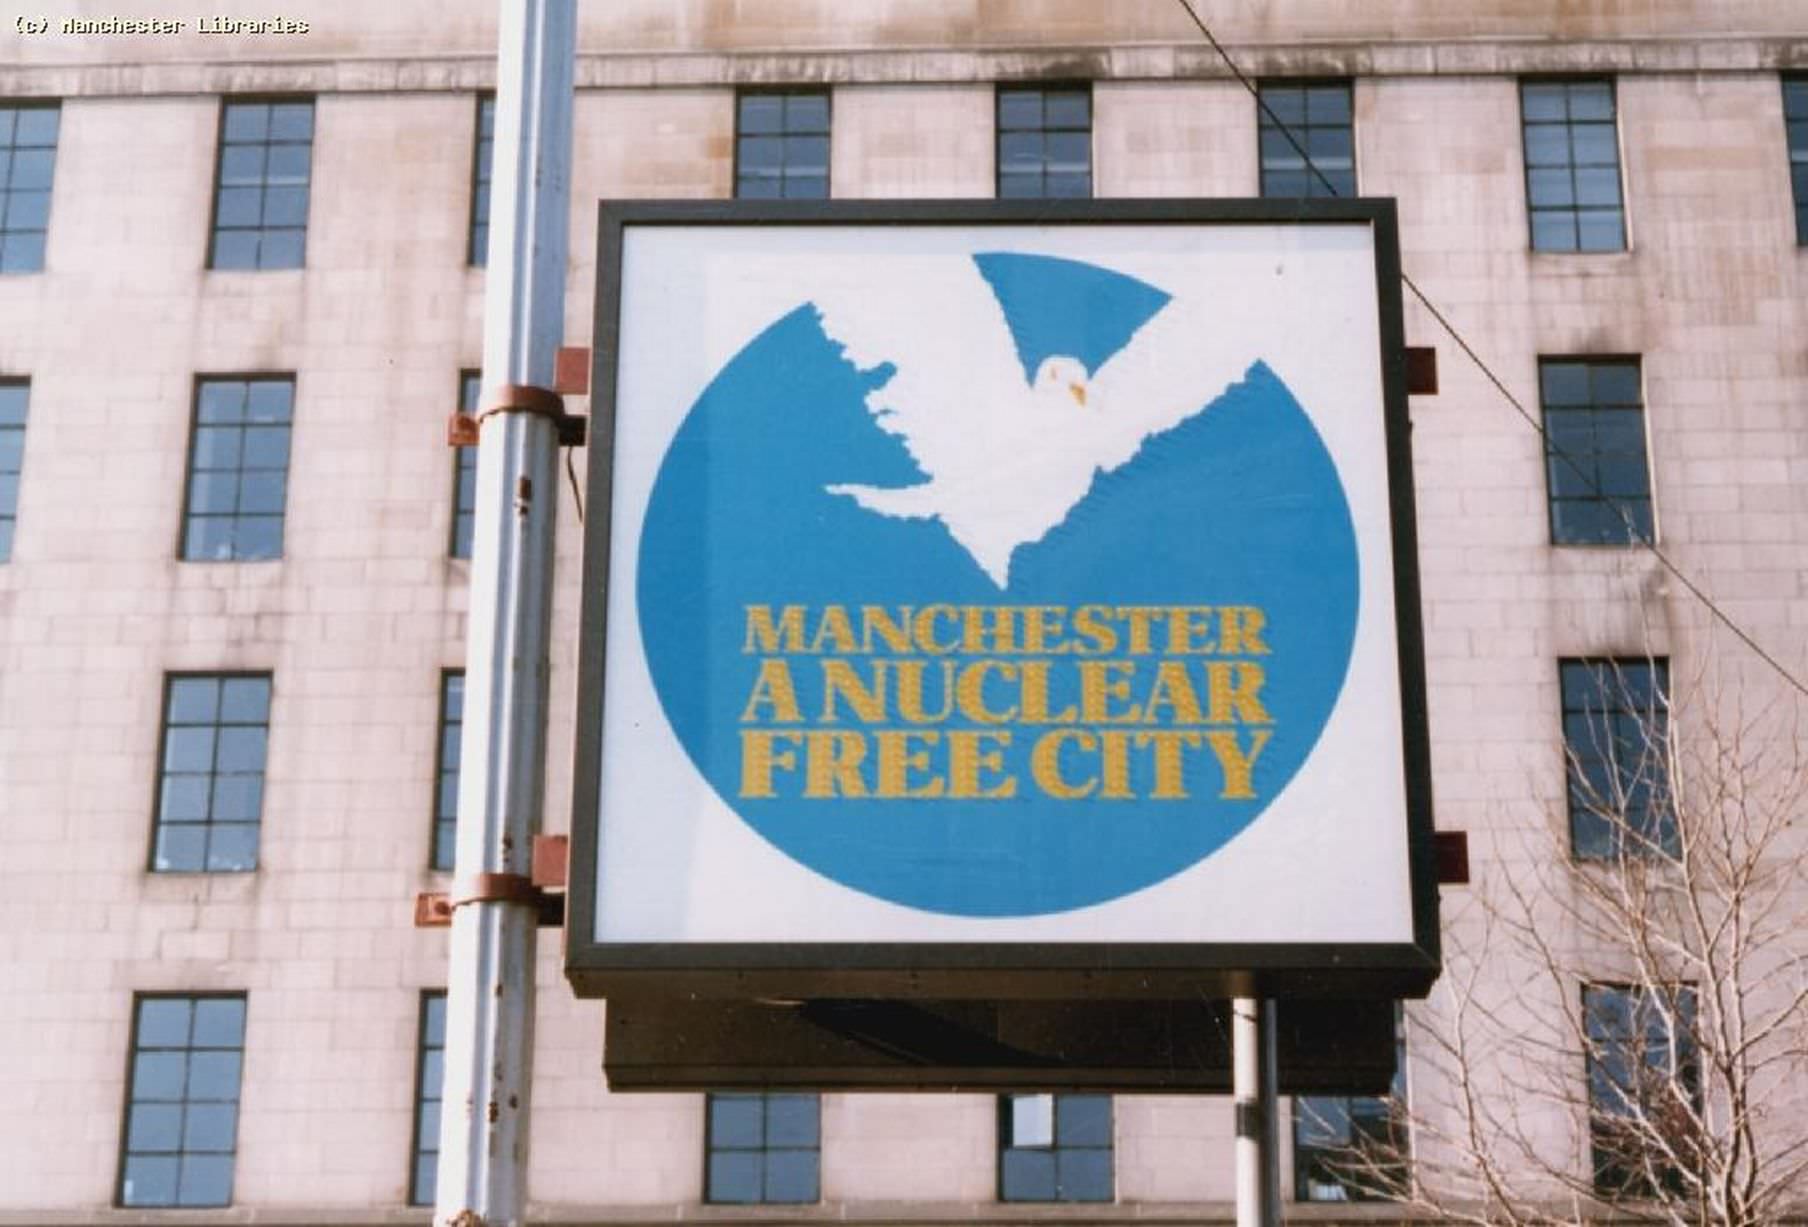 Nuclear Free City' sign in Manchester city centre